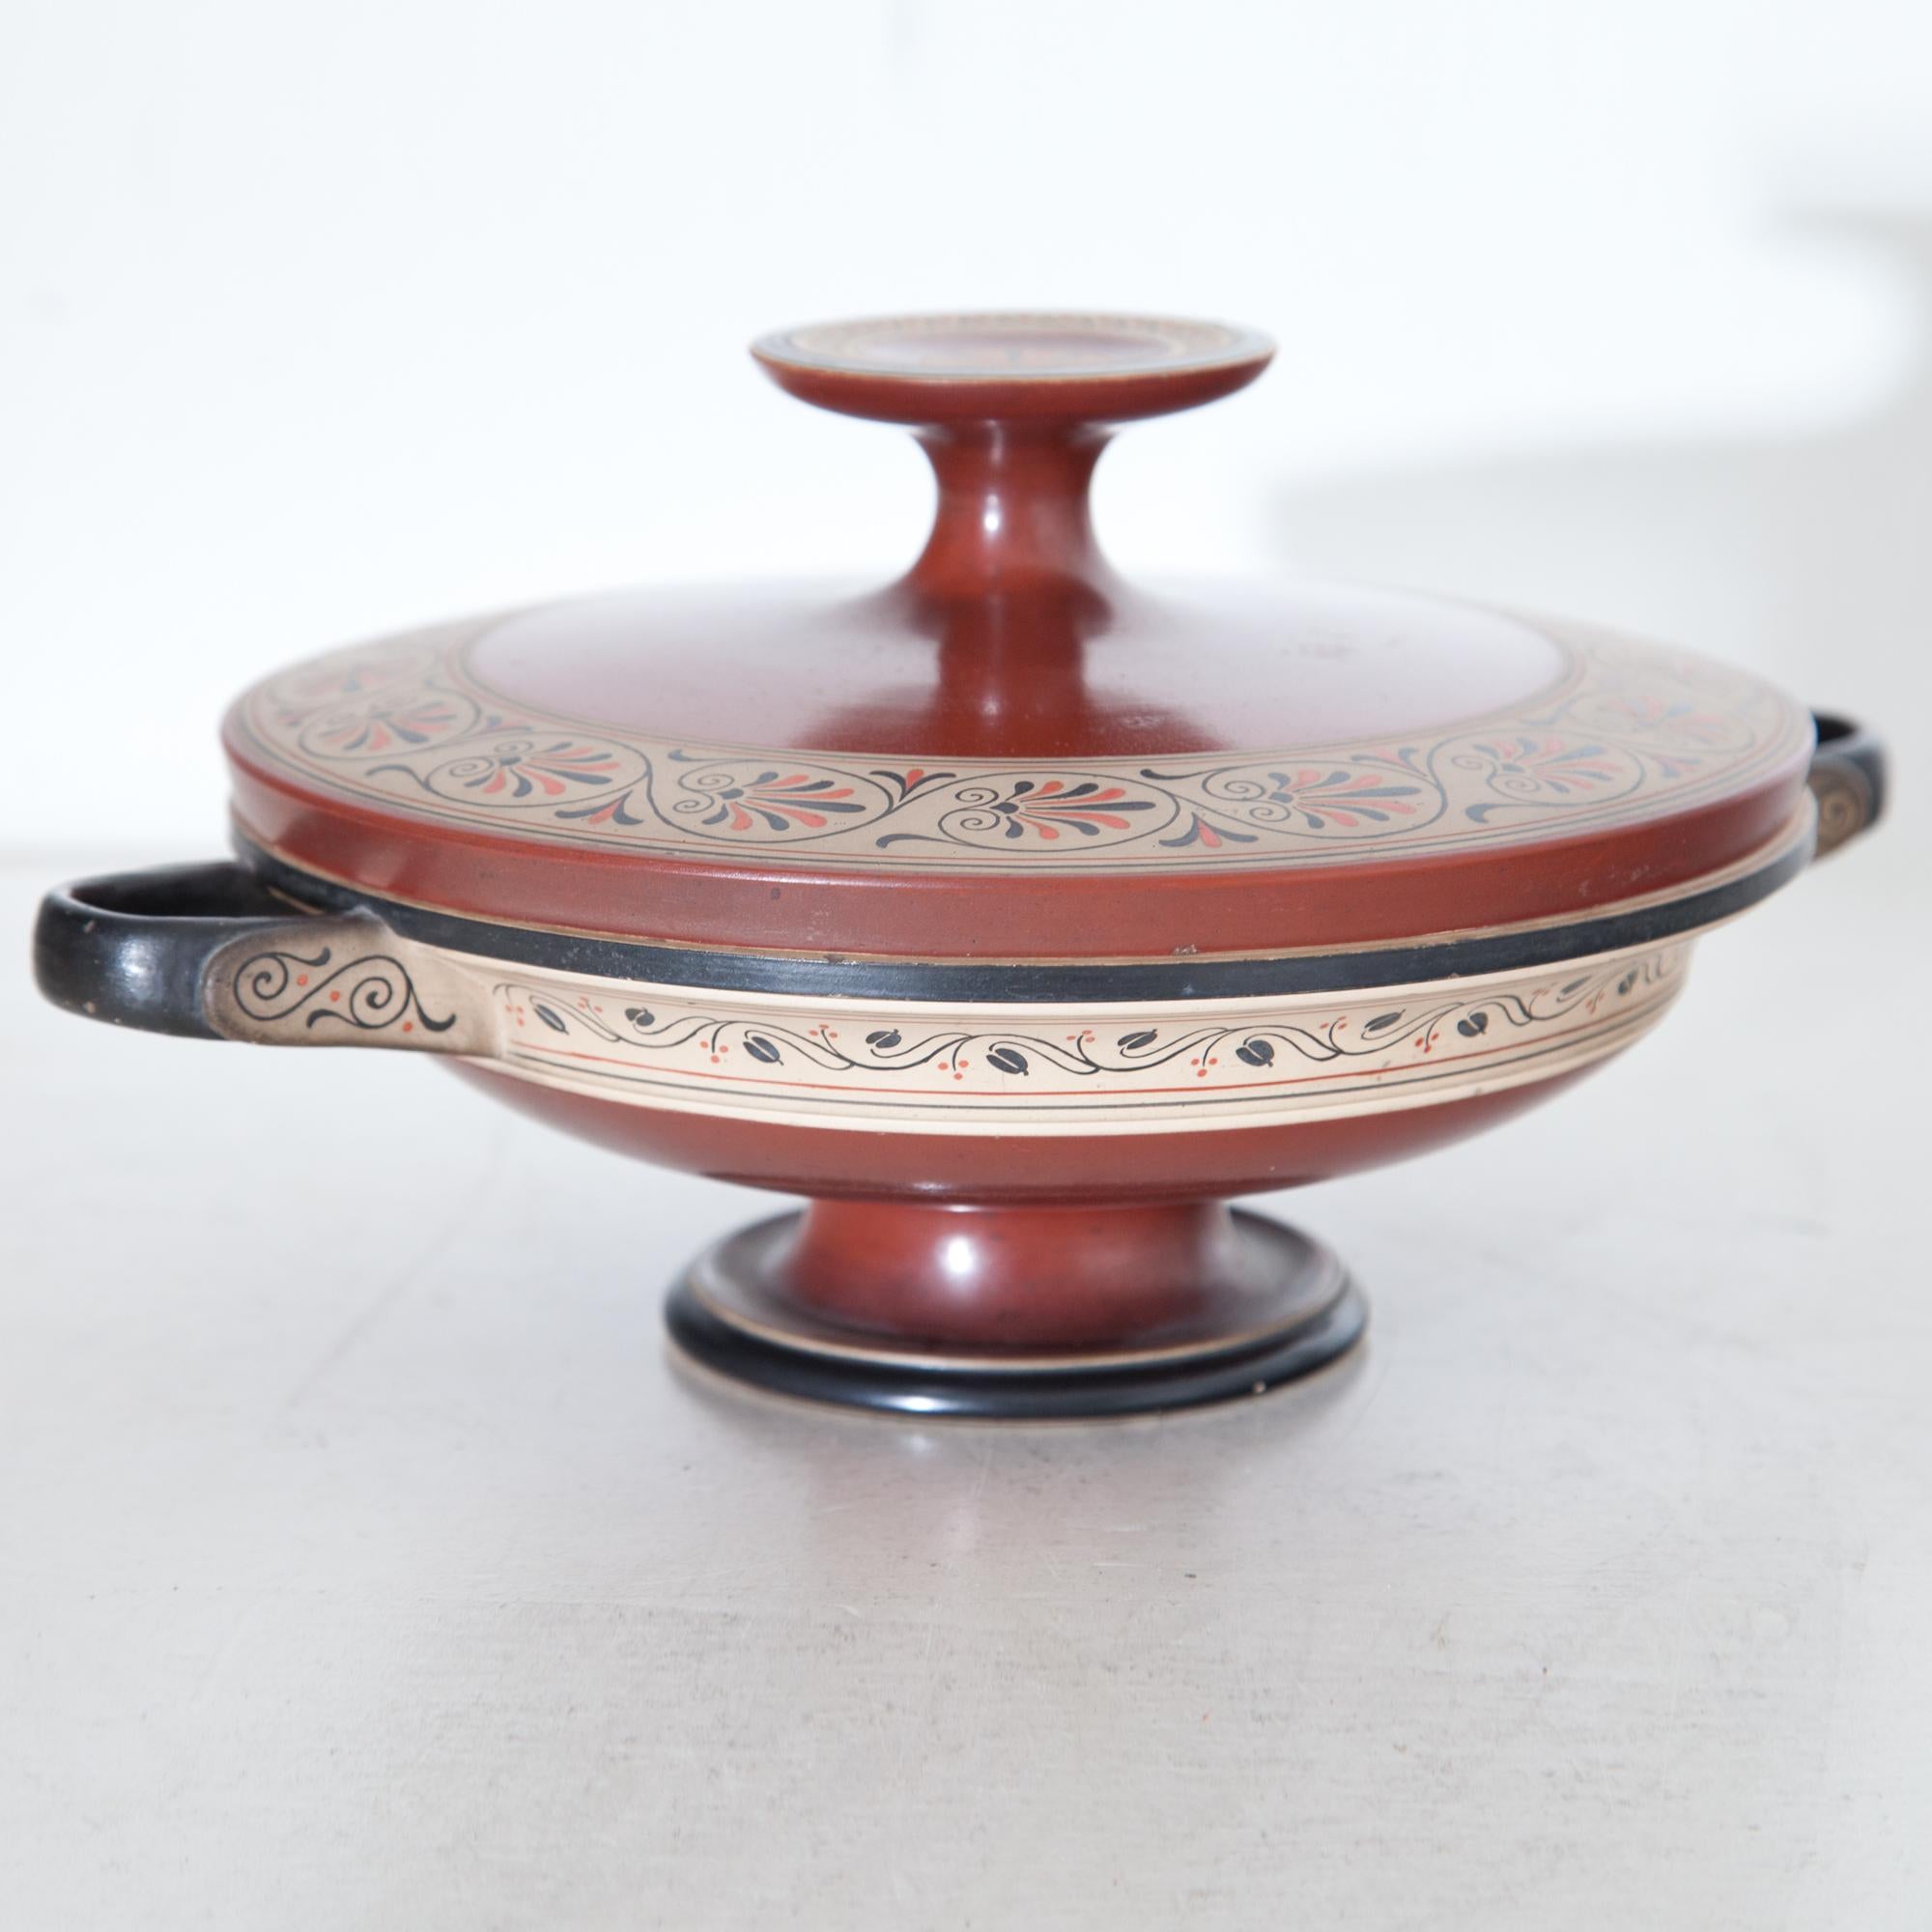 Kylix with lid by Peter Ipsen (1815-1860) from the Second Half of the 19th century. The lid and bowl are in red and decorated with acanthus leaf and tendril decorations on a beige ground, stand, handles and rim are set off in black.